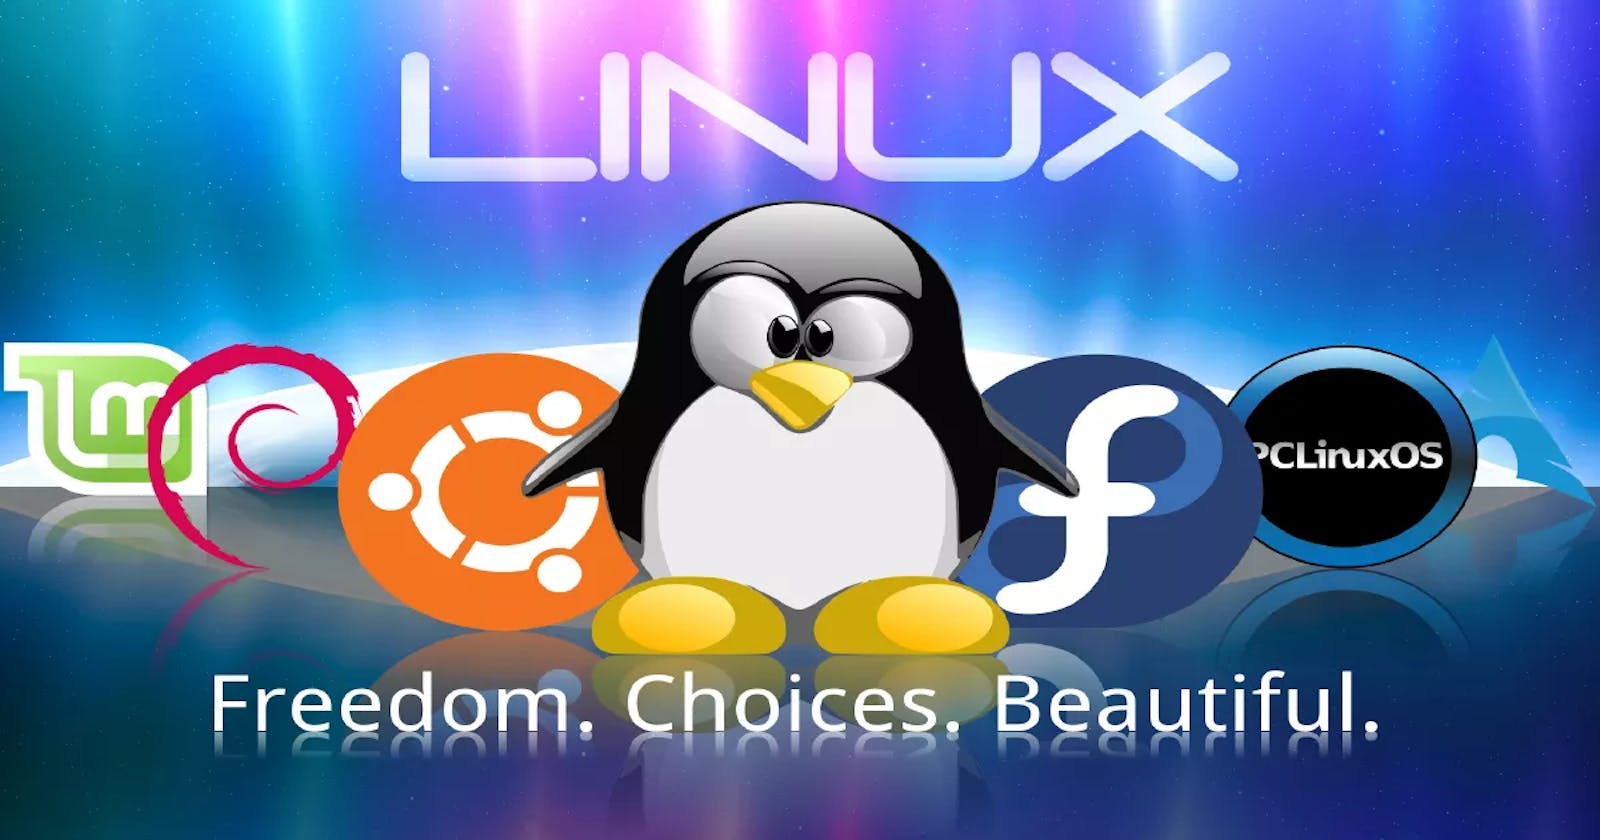 Linux: A Journey into Open Source